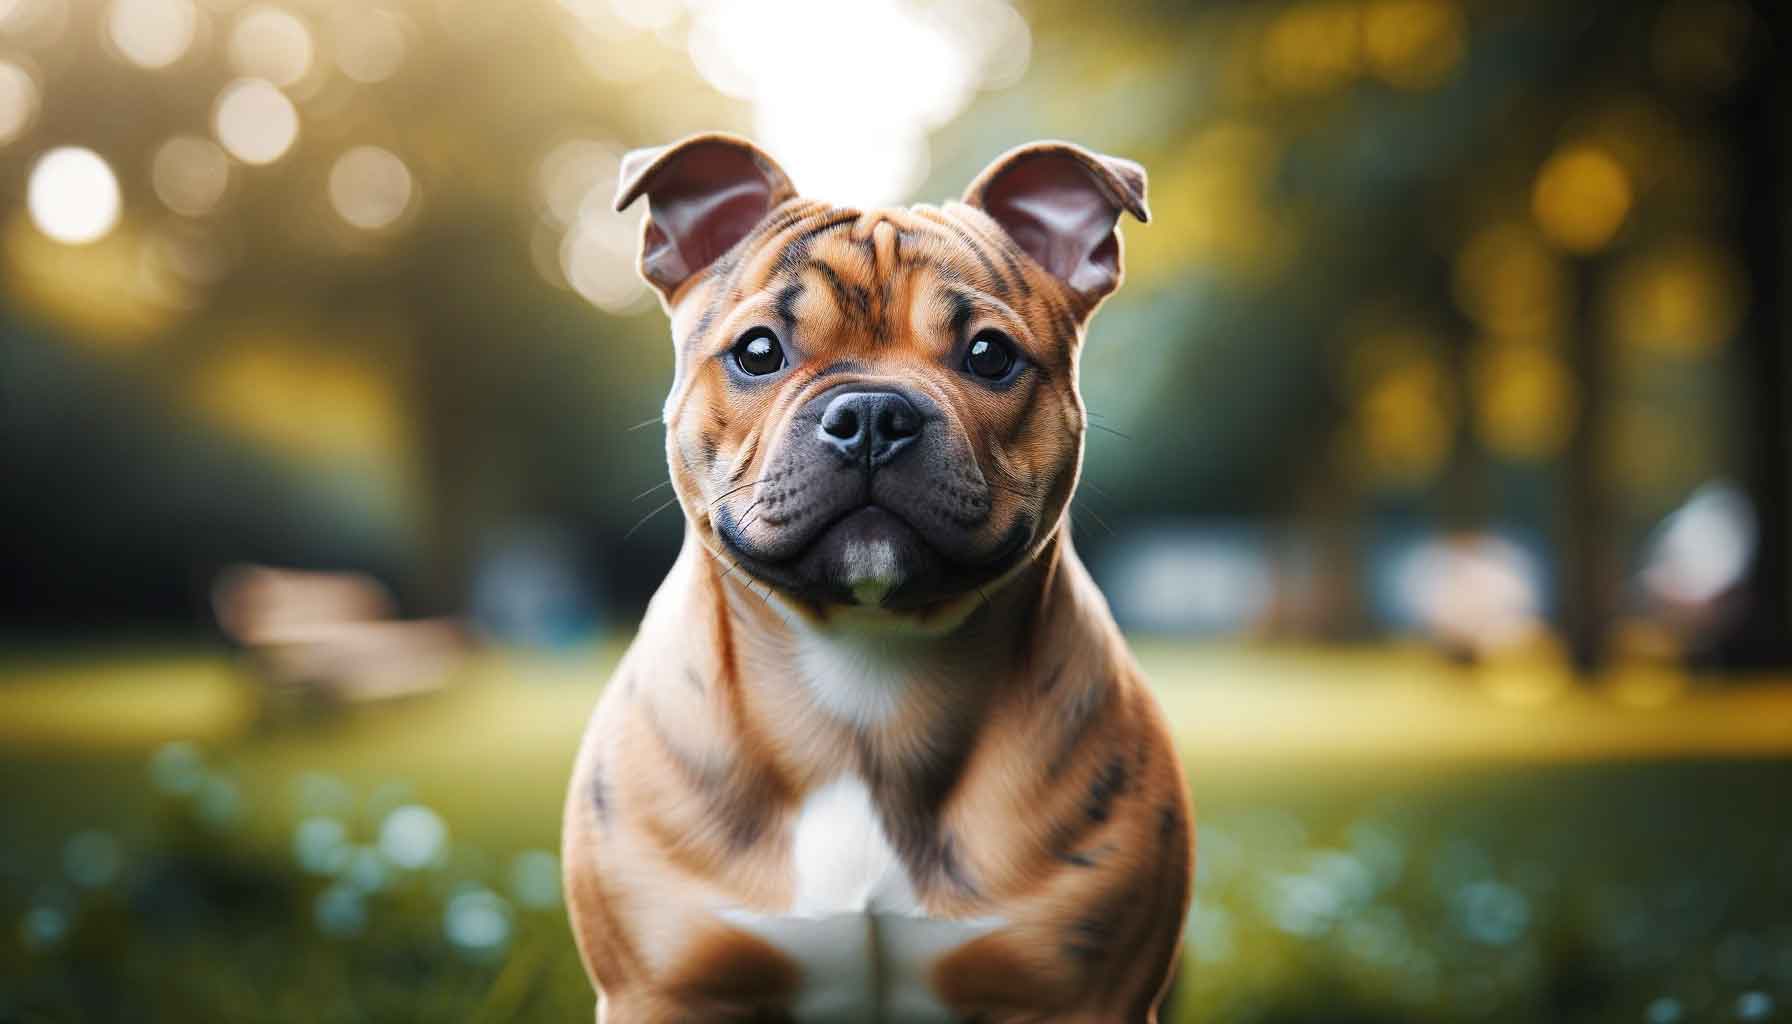 A fawn micro bully dog with reddish-brown to pale cream coat, black snout, and 'mascara' around the eyes, standing in a serene park illuminated by soft daylight.